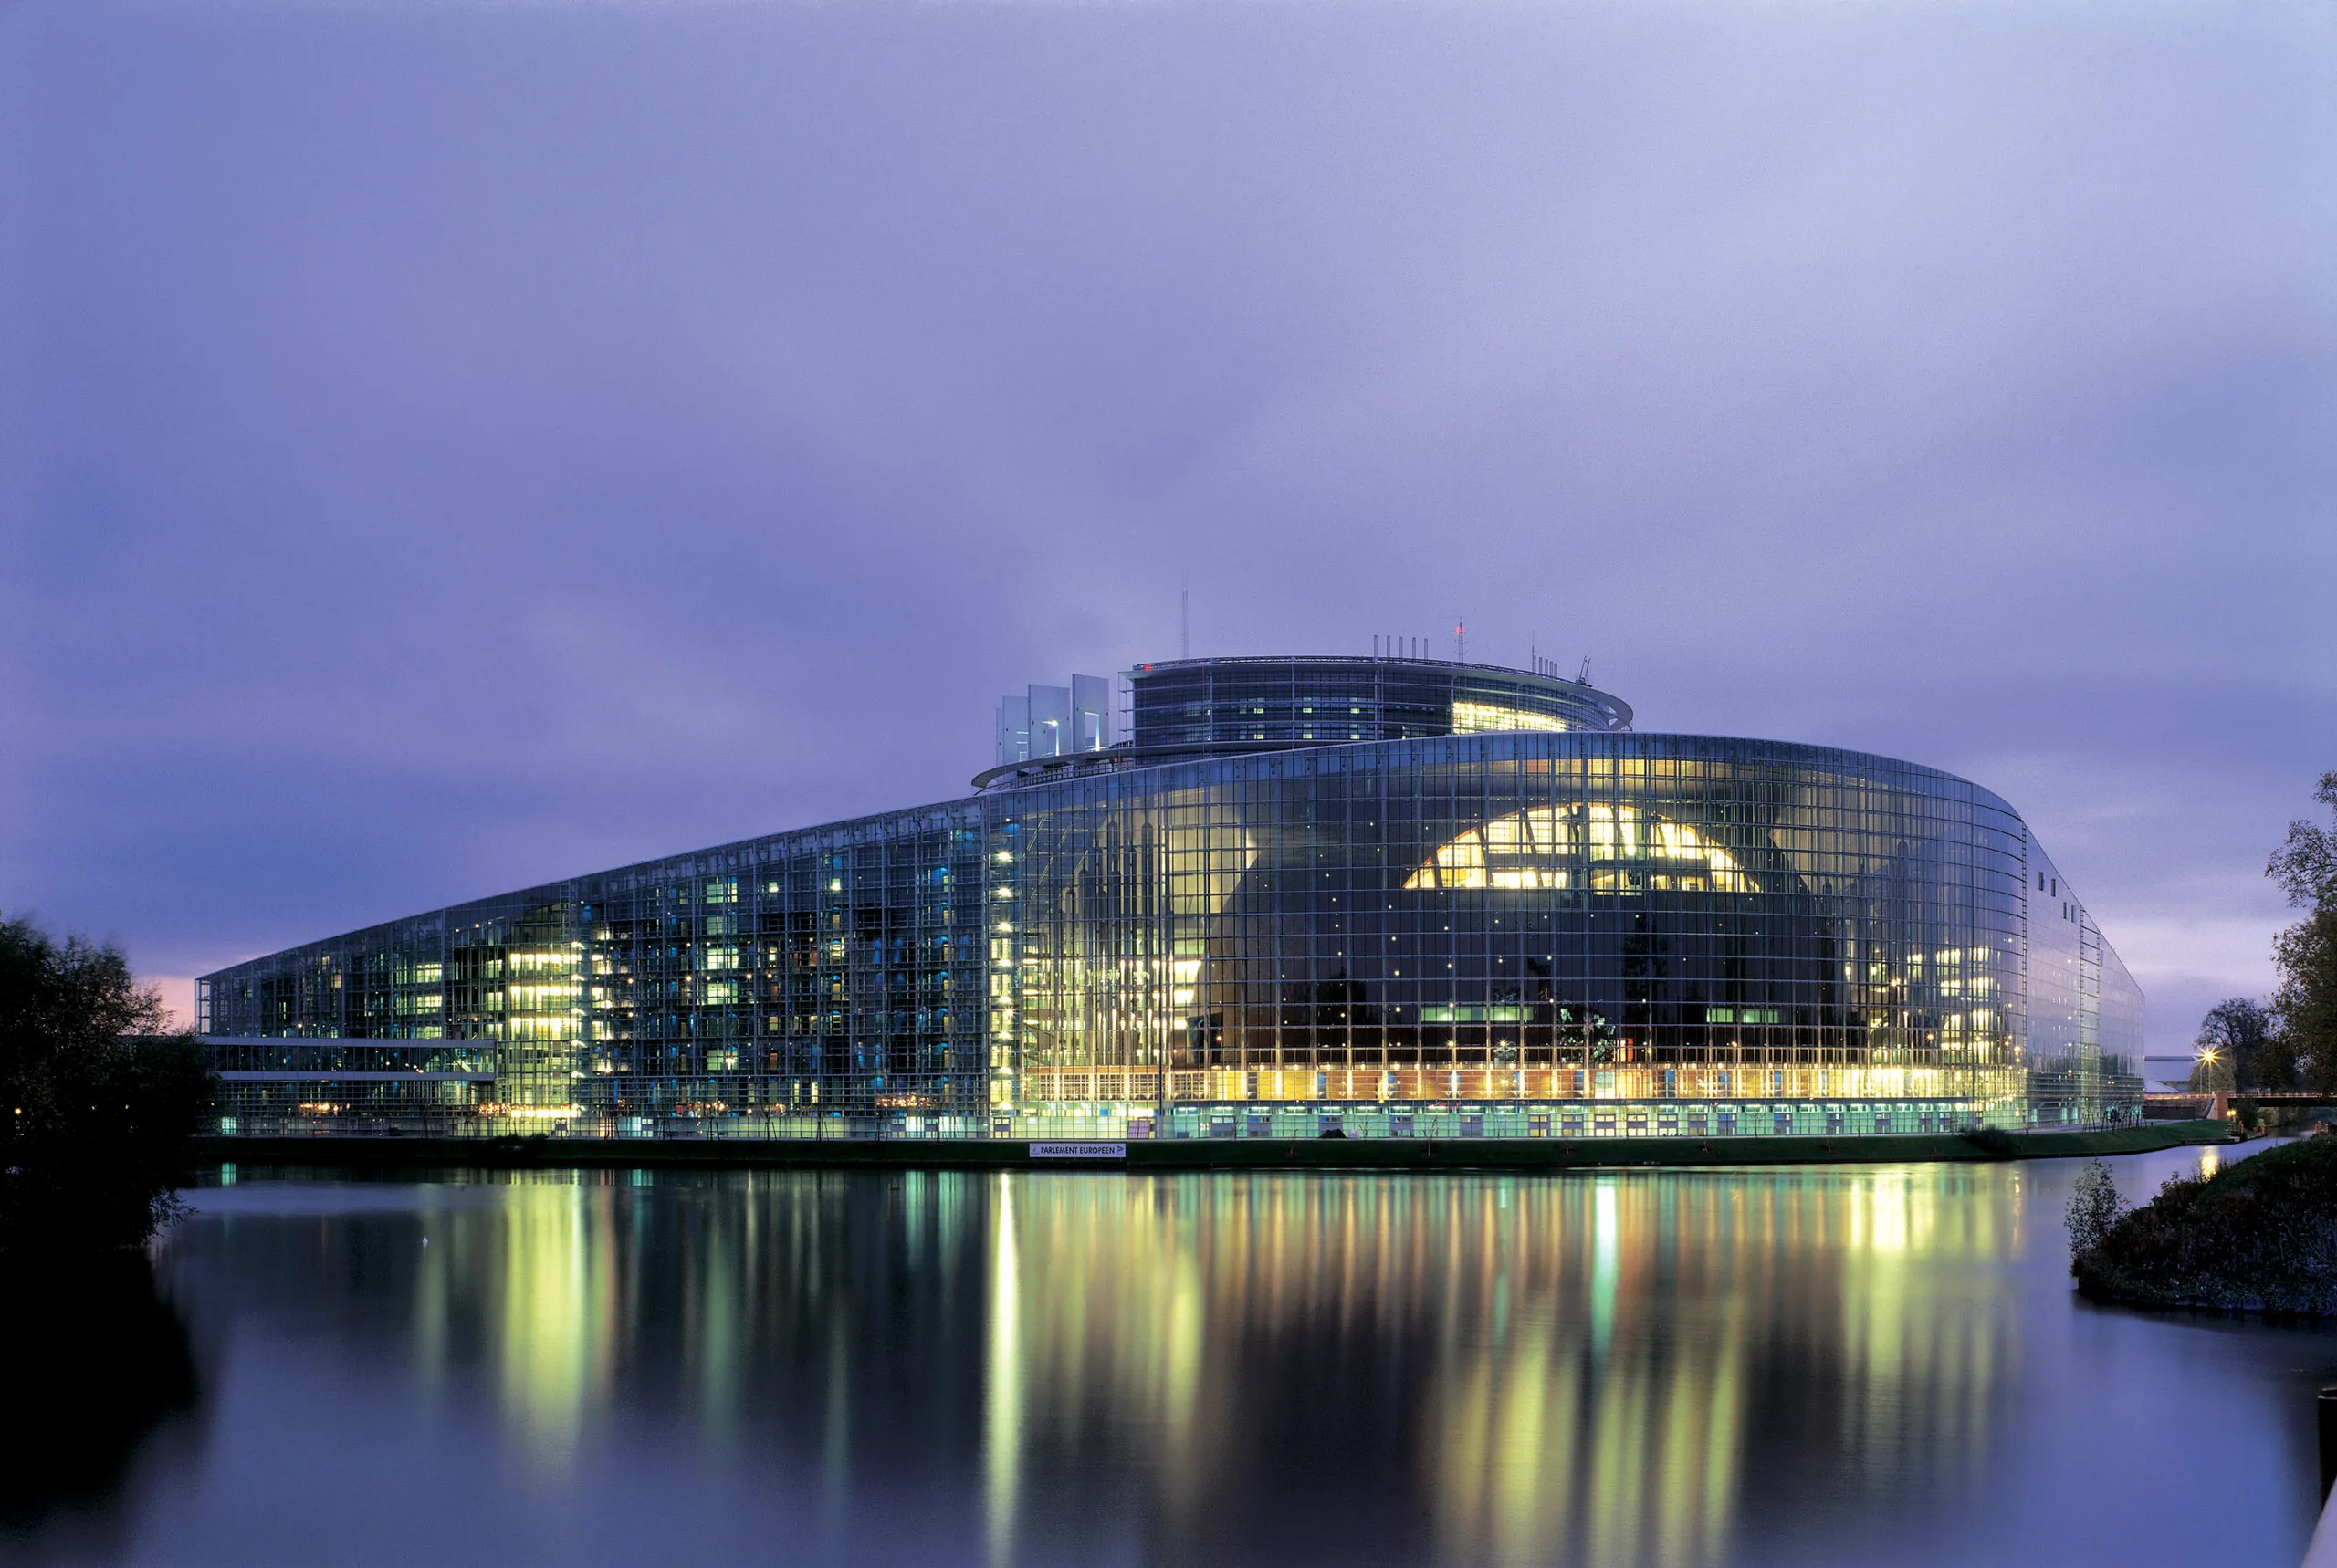 European Parliament in France, Europe | Architecture - Rated 3.5